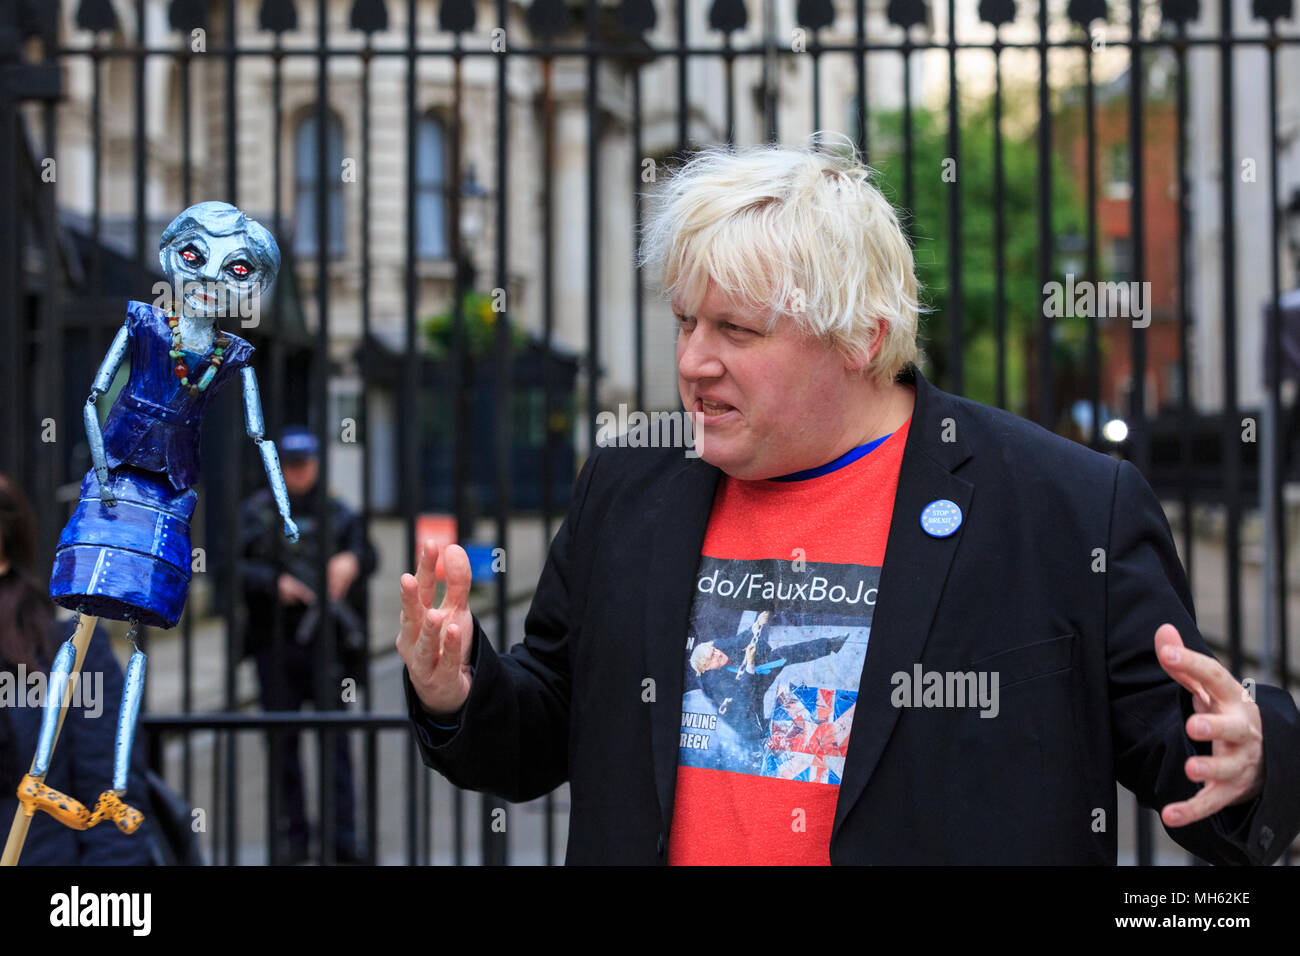 Westminster, London, 30th April 2018. 'Faux BoJo', a.k.a. Drew Galdron, performs as Foreign Secretary Boris Johnson opposite 10 Downing Street, singing with a puppet of Theresa May. Anti-Brexit and pro-European protesters gather outside and opposite 10 Downing Street for the 'Vigil against Brexit', while the House of Lords again debates the European Union (Withdrawal) Bill. Stock Photo